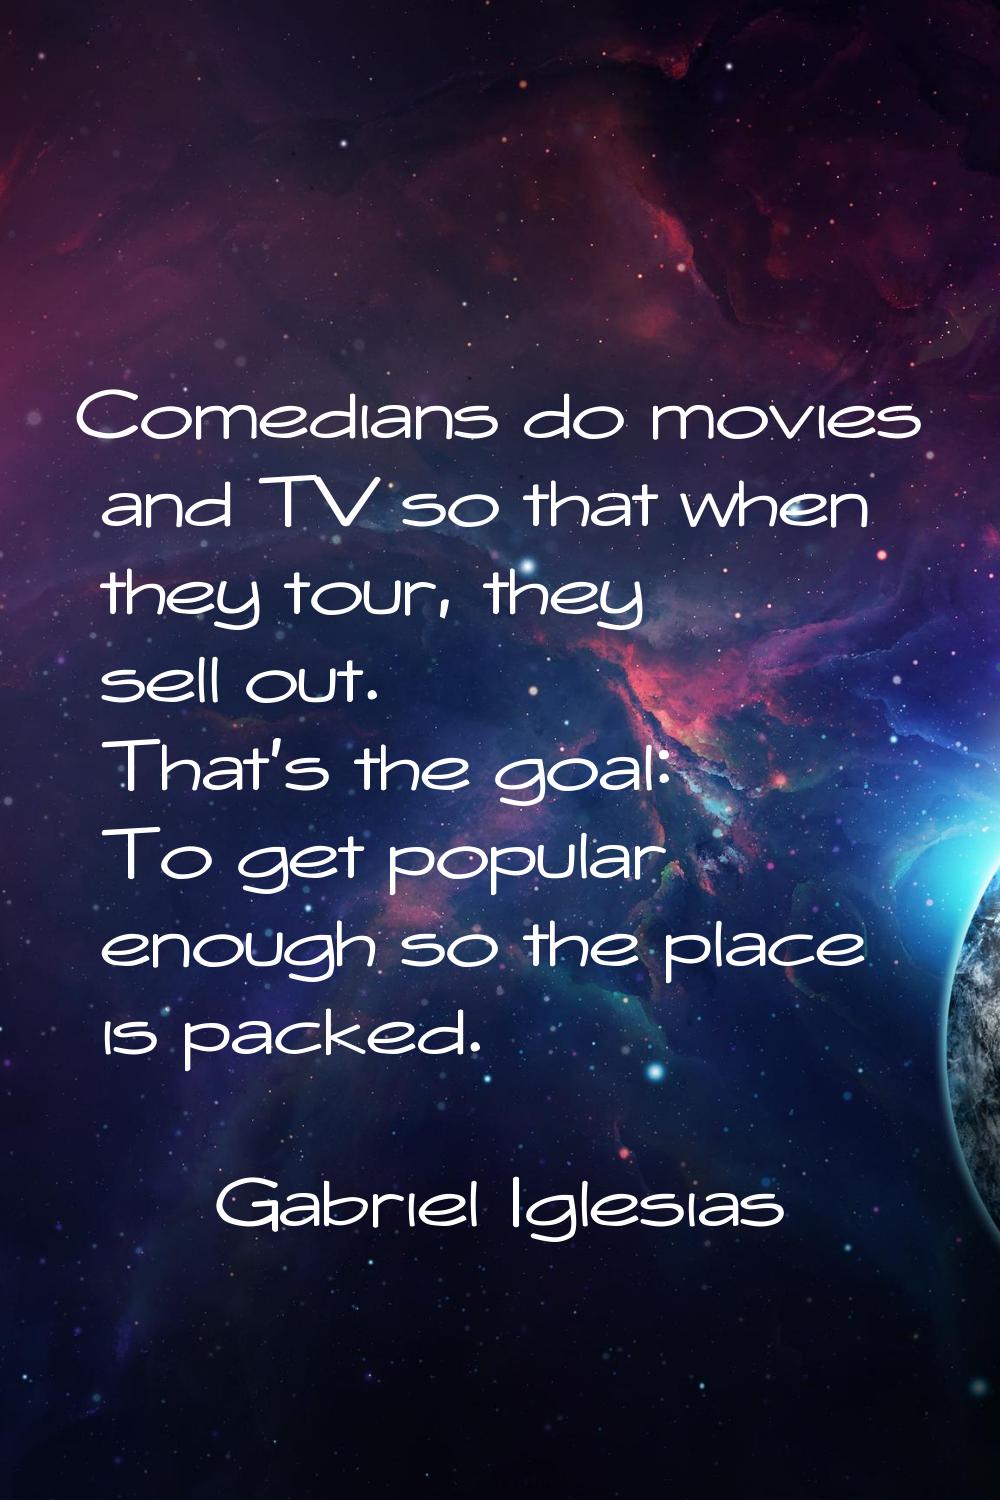 Comedians do movies and TV so that when they tour, they sell out. That's the goal: To get popular e